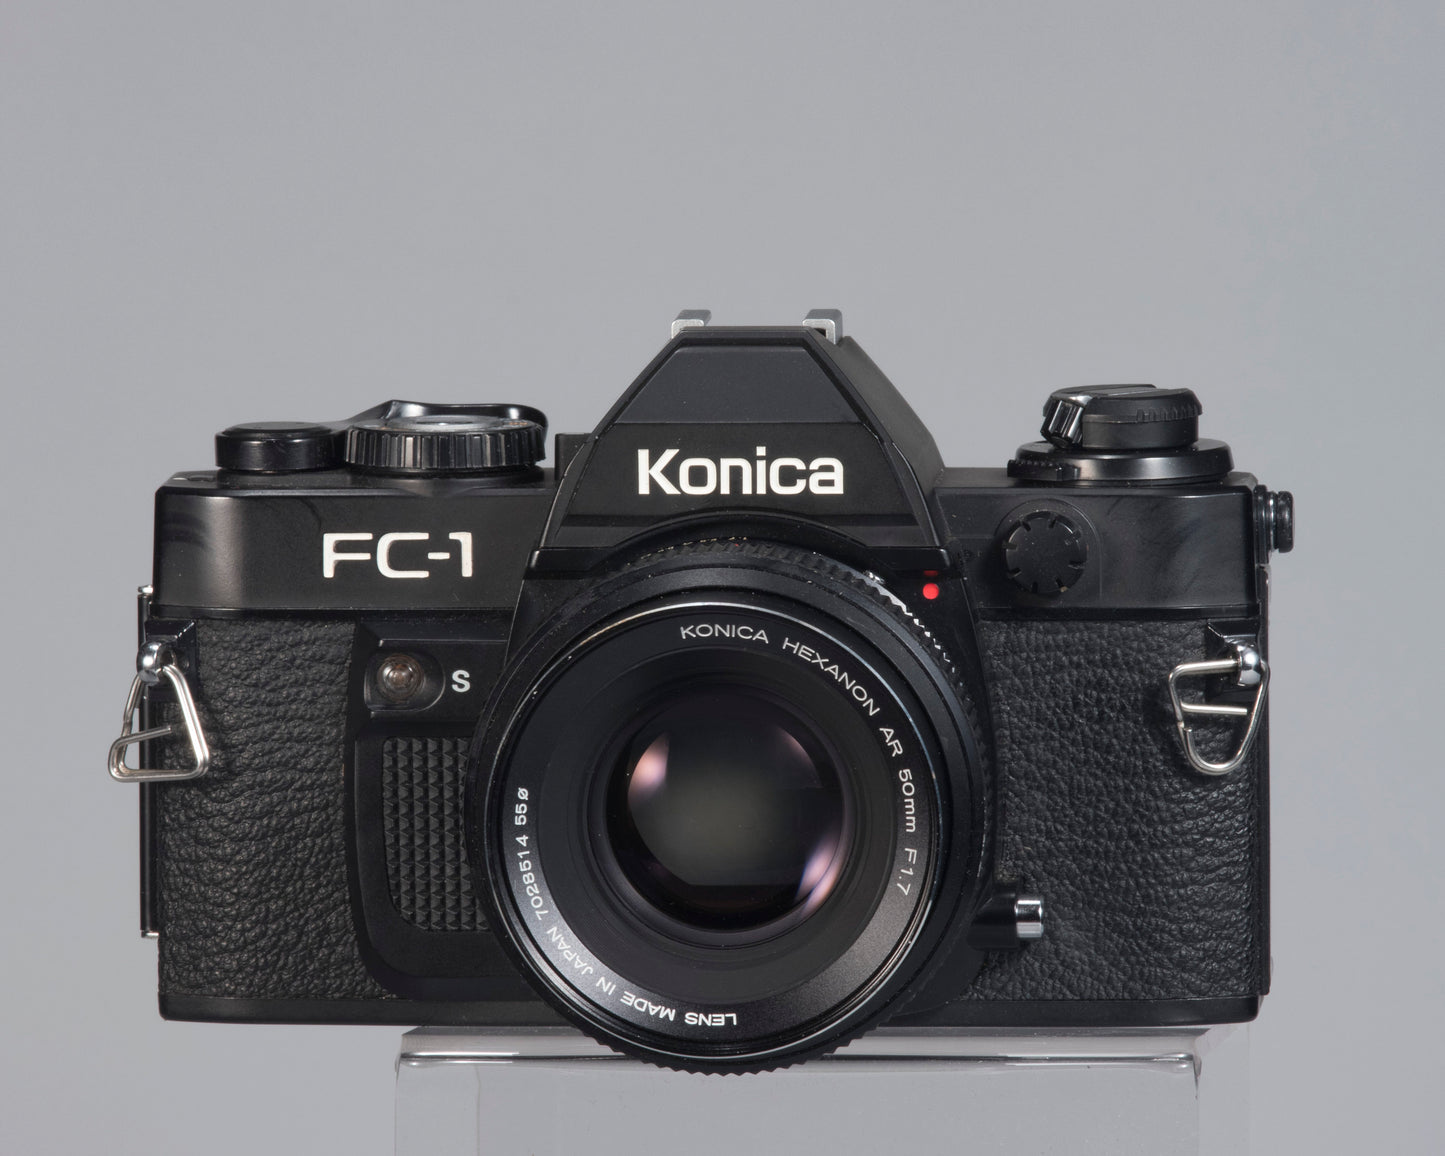 Konica FC-1 35mm film SLR outfit